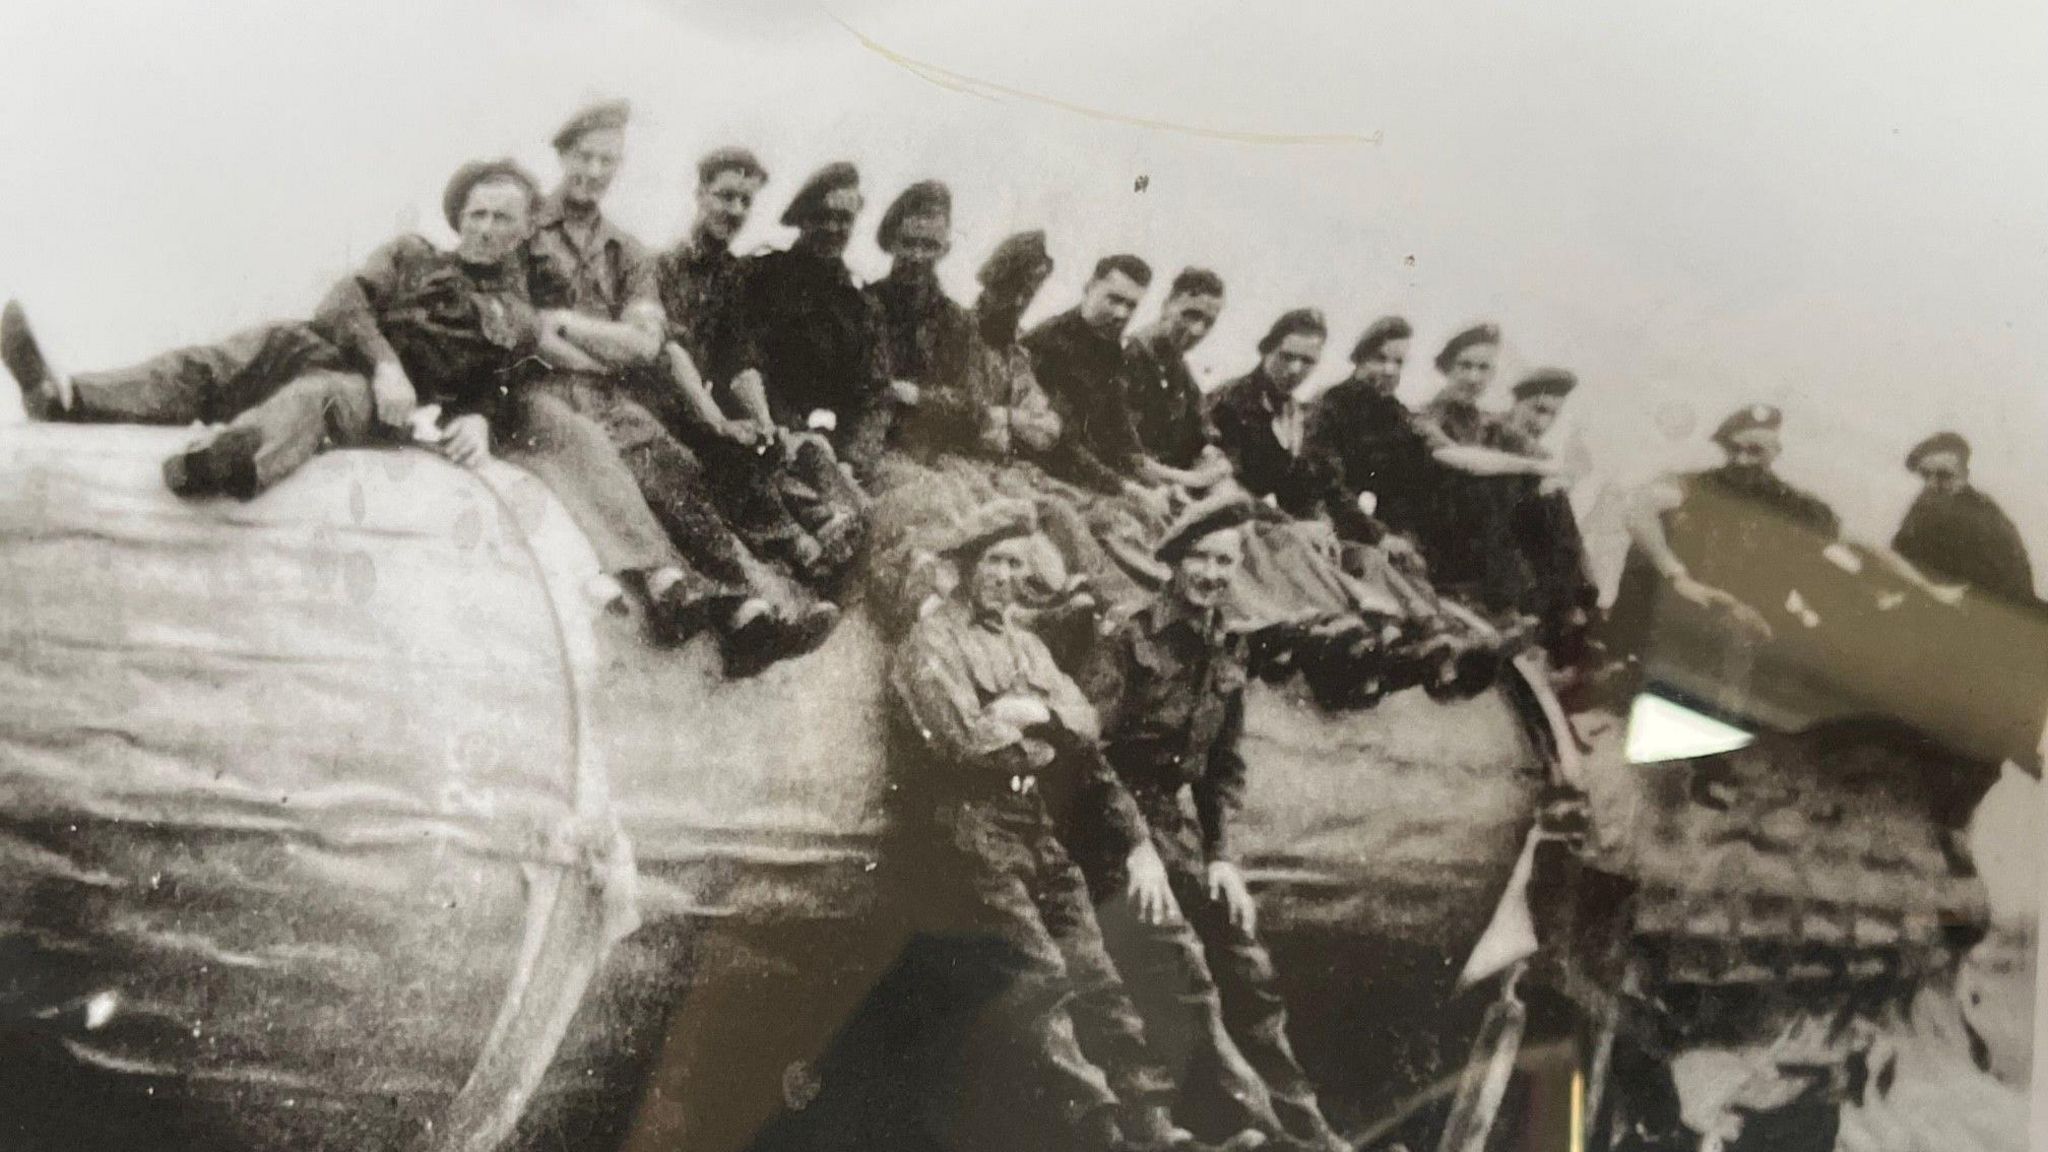 Mr Dalton, fifth from right, sits on a captured V2 rocket in wartime Germany